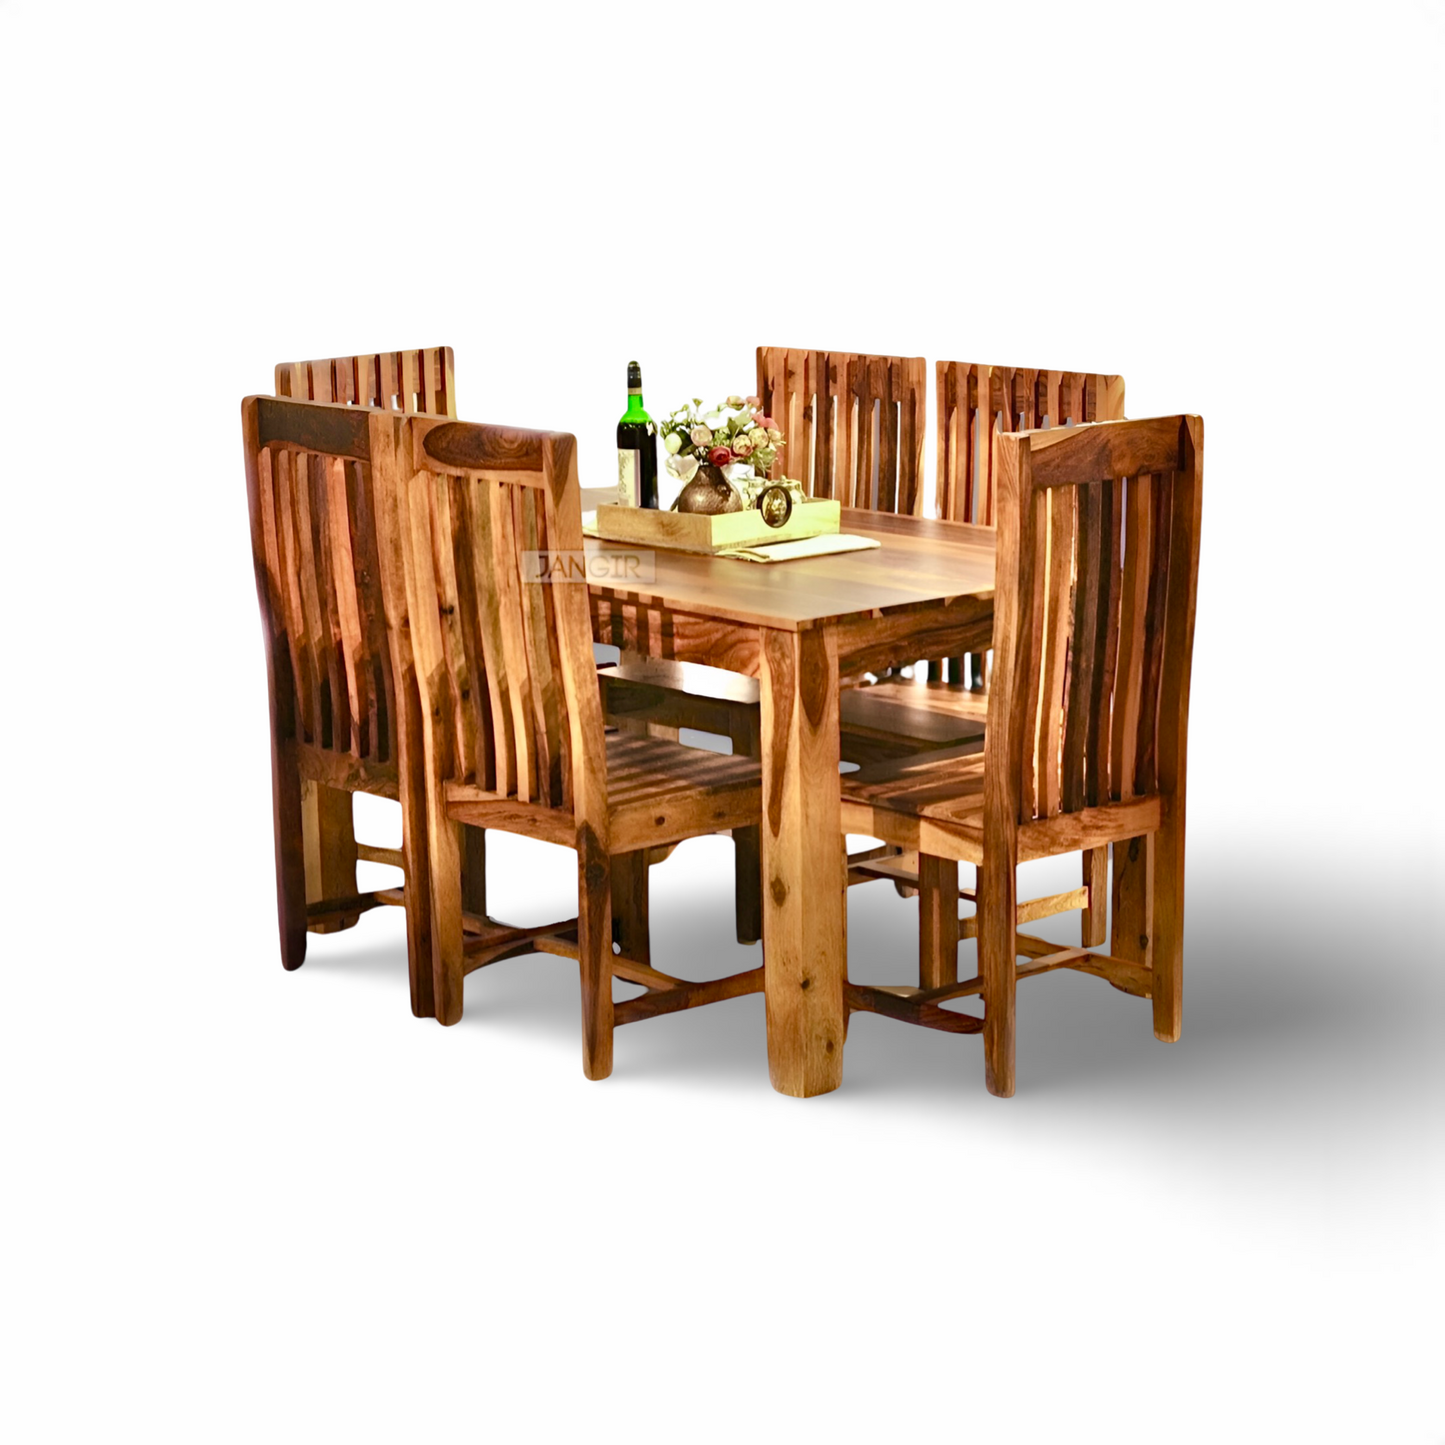 Bring home styles that last with this modern Red Dining Set. Crafted from Sheesham wood. Buy four and six seater dining table set near you in Bangalore today